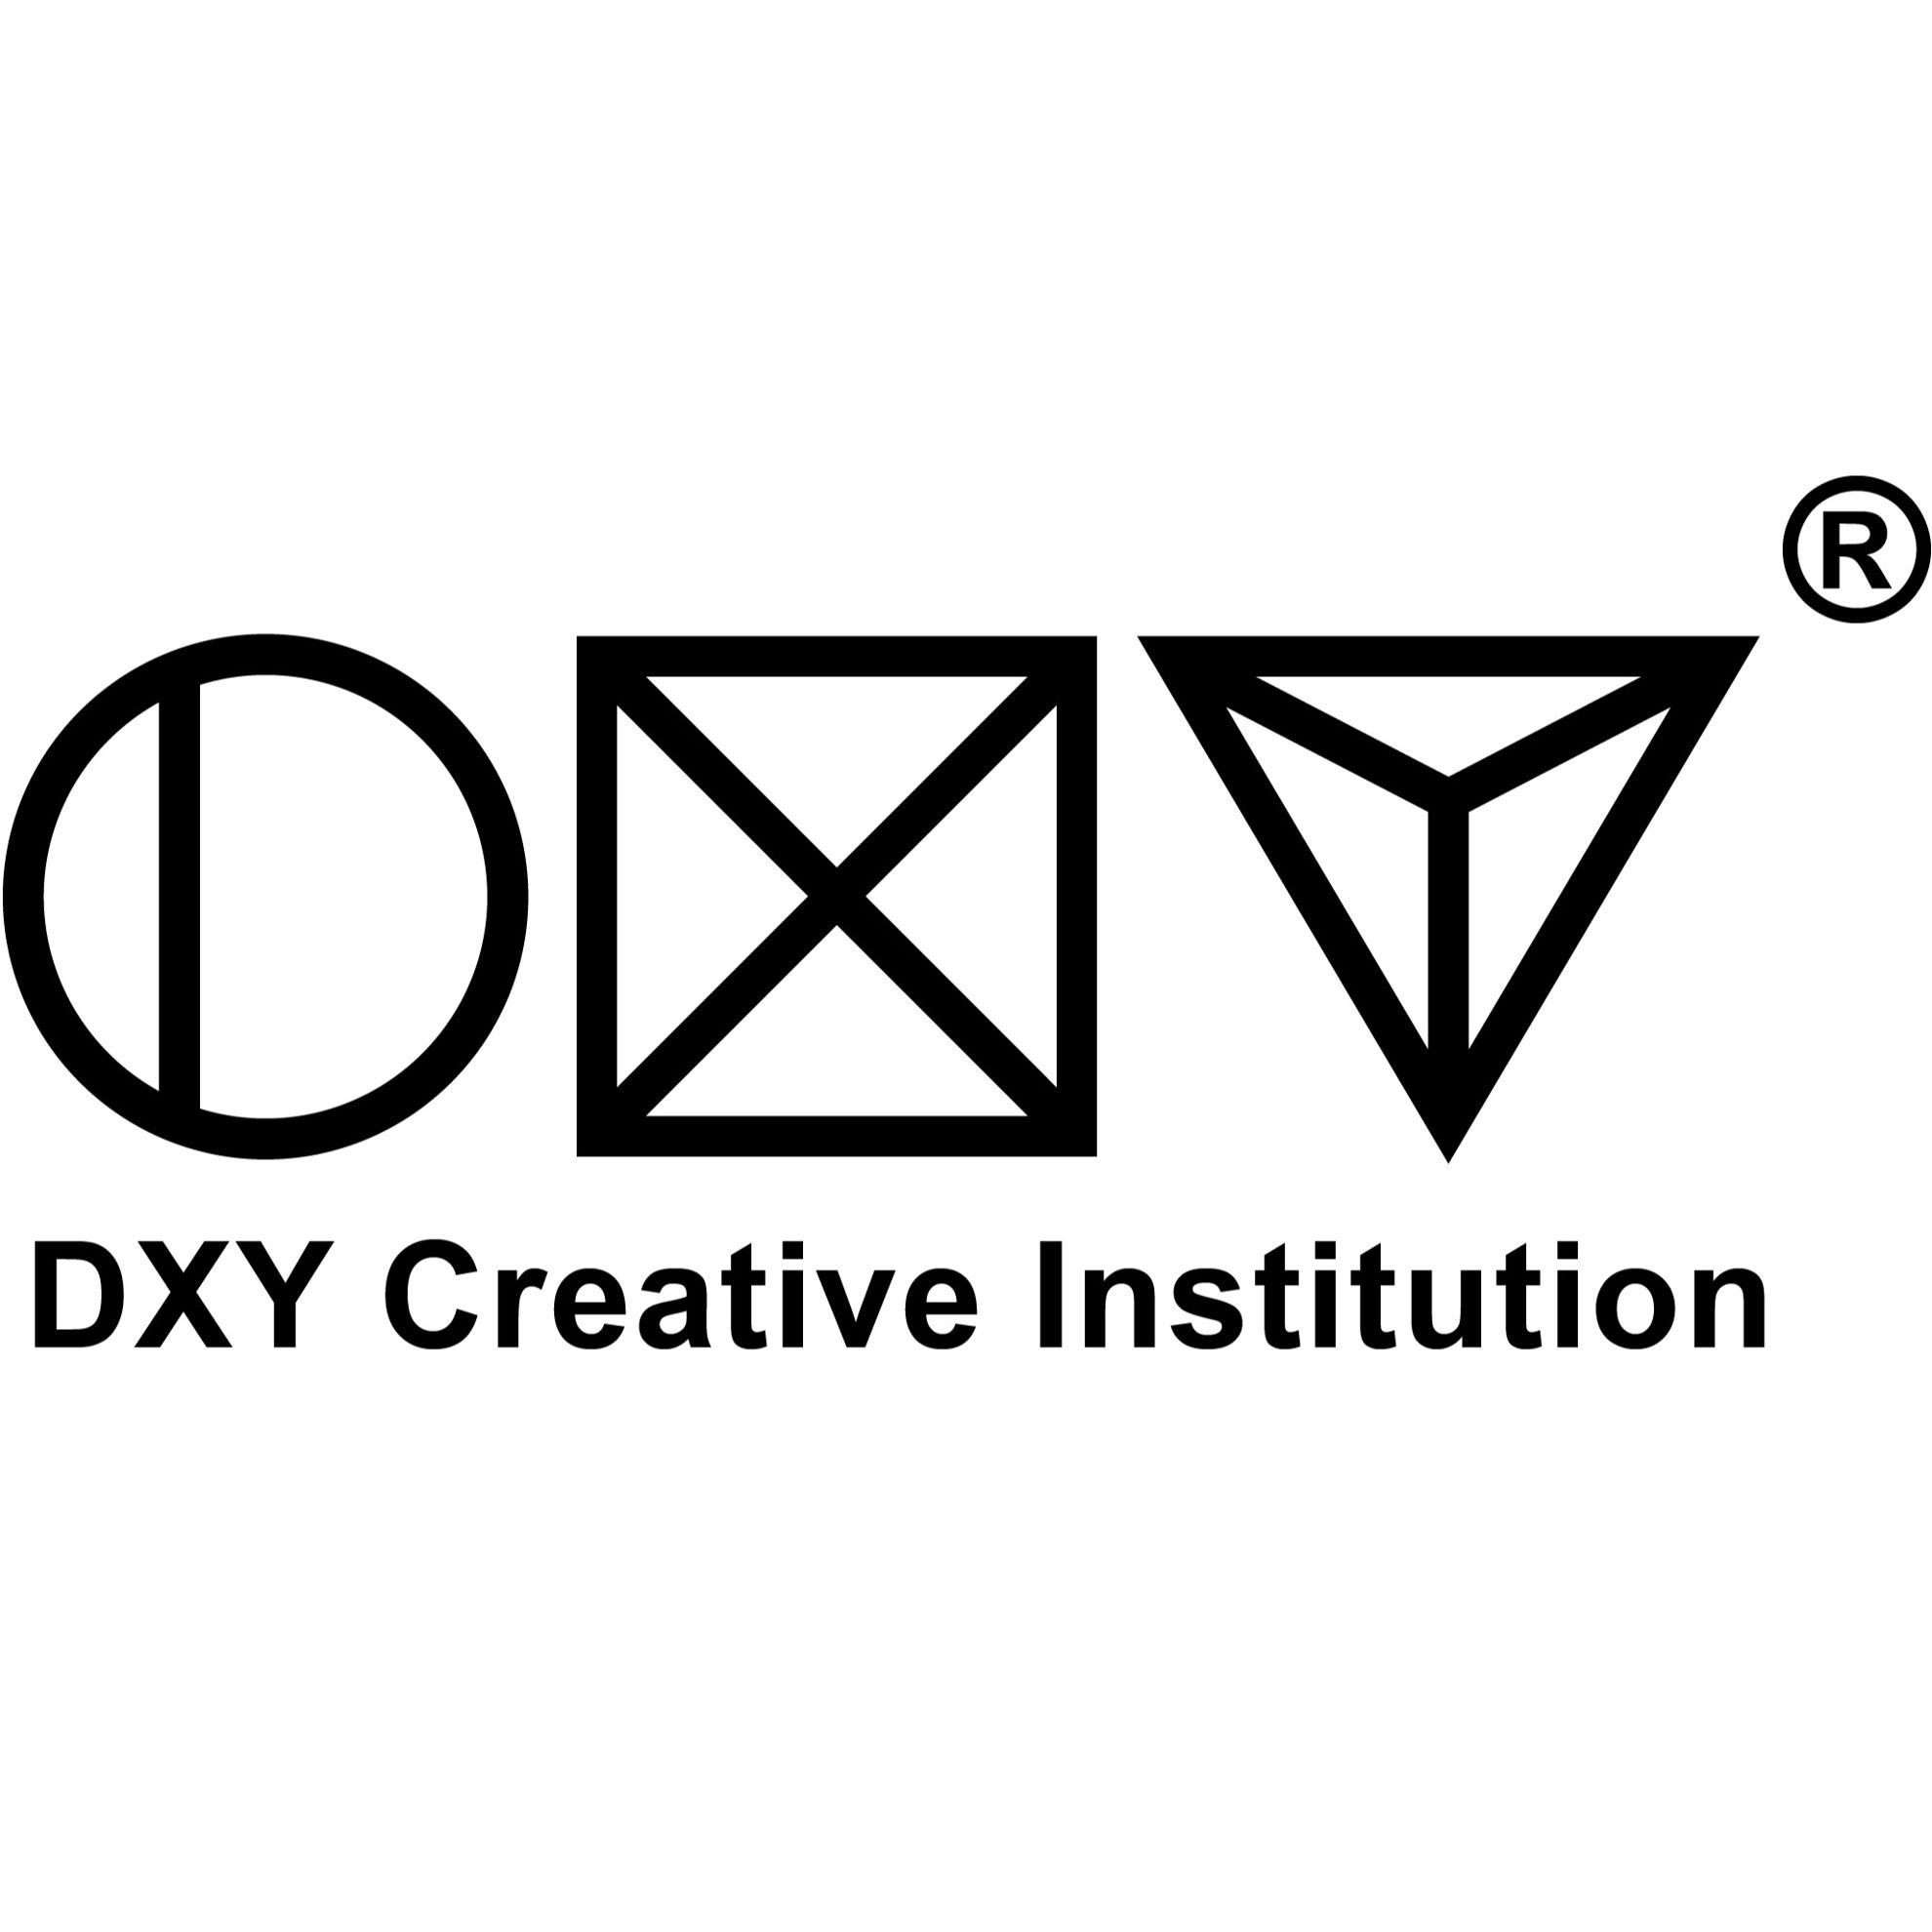 DXY Creative Institution